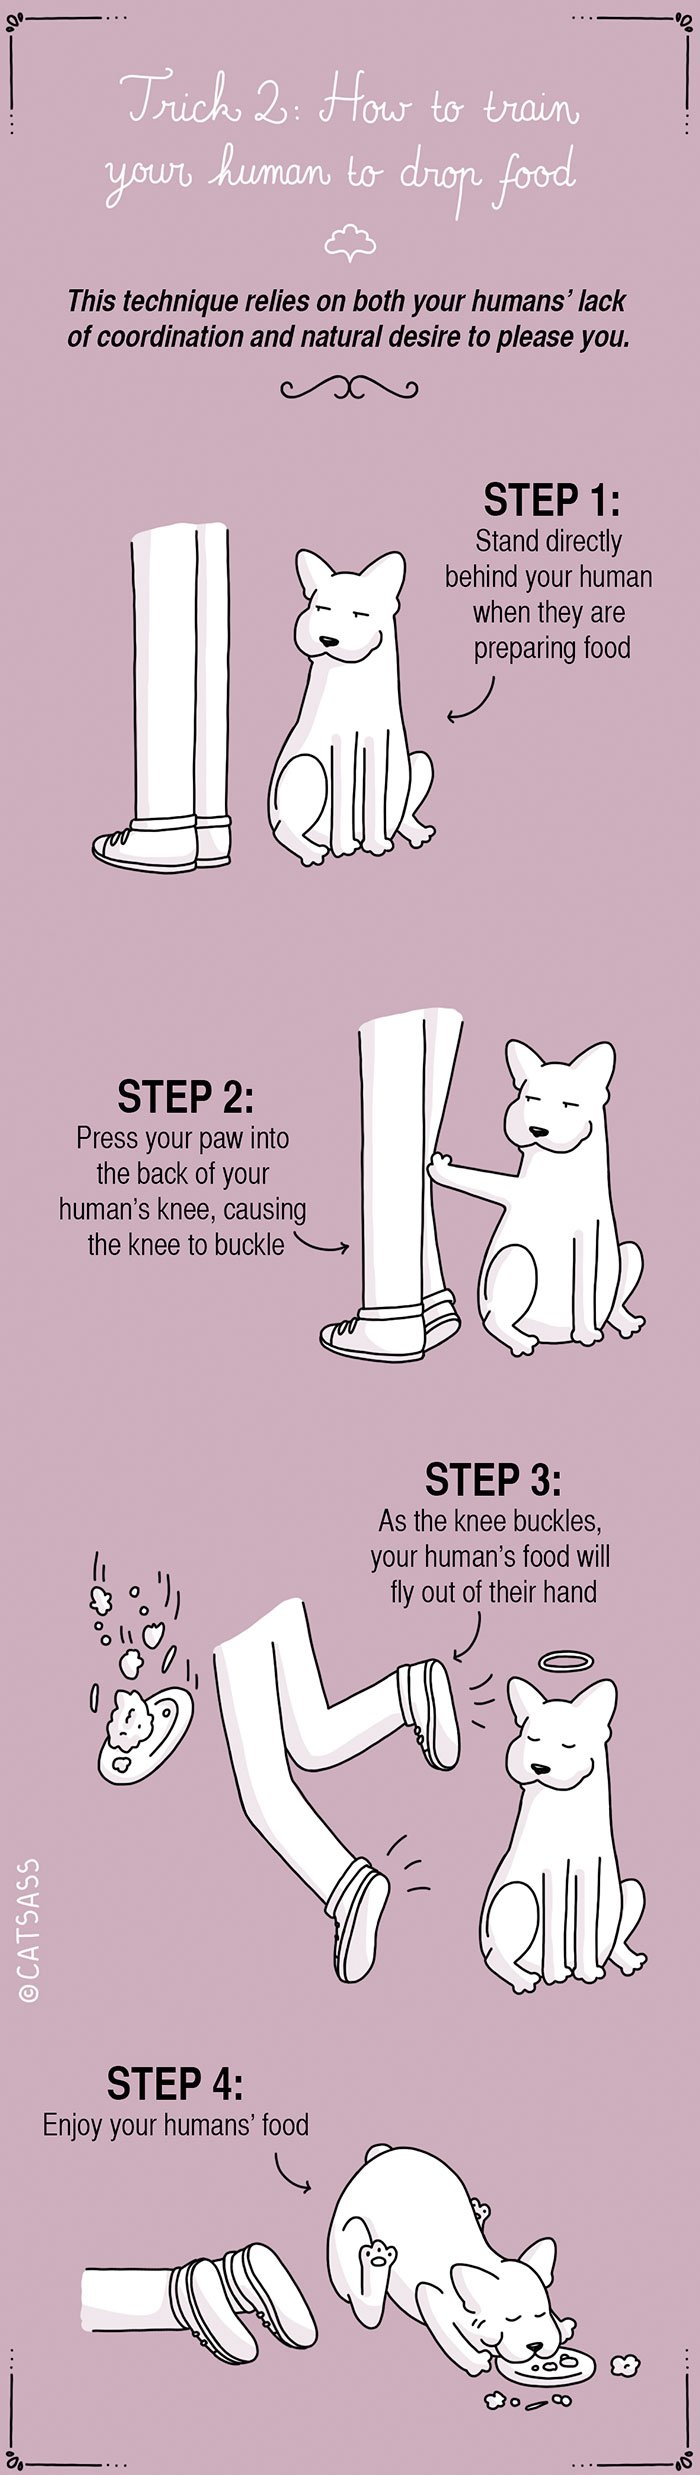 Tricks that your dogs use